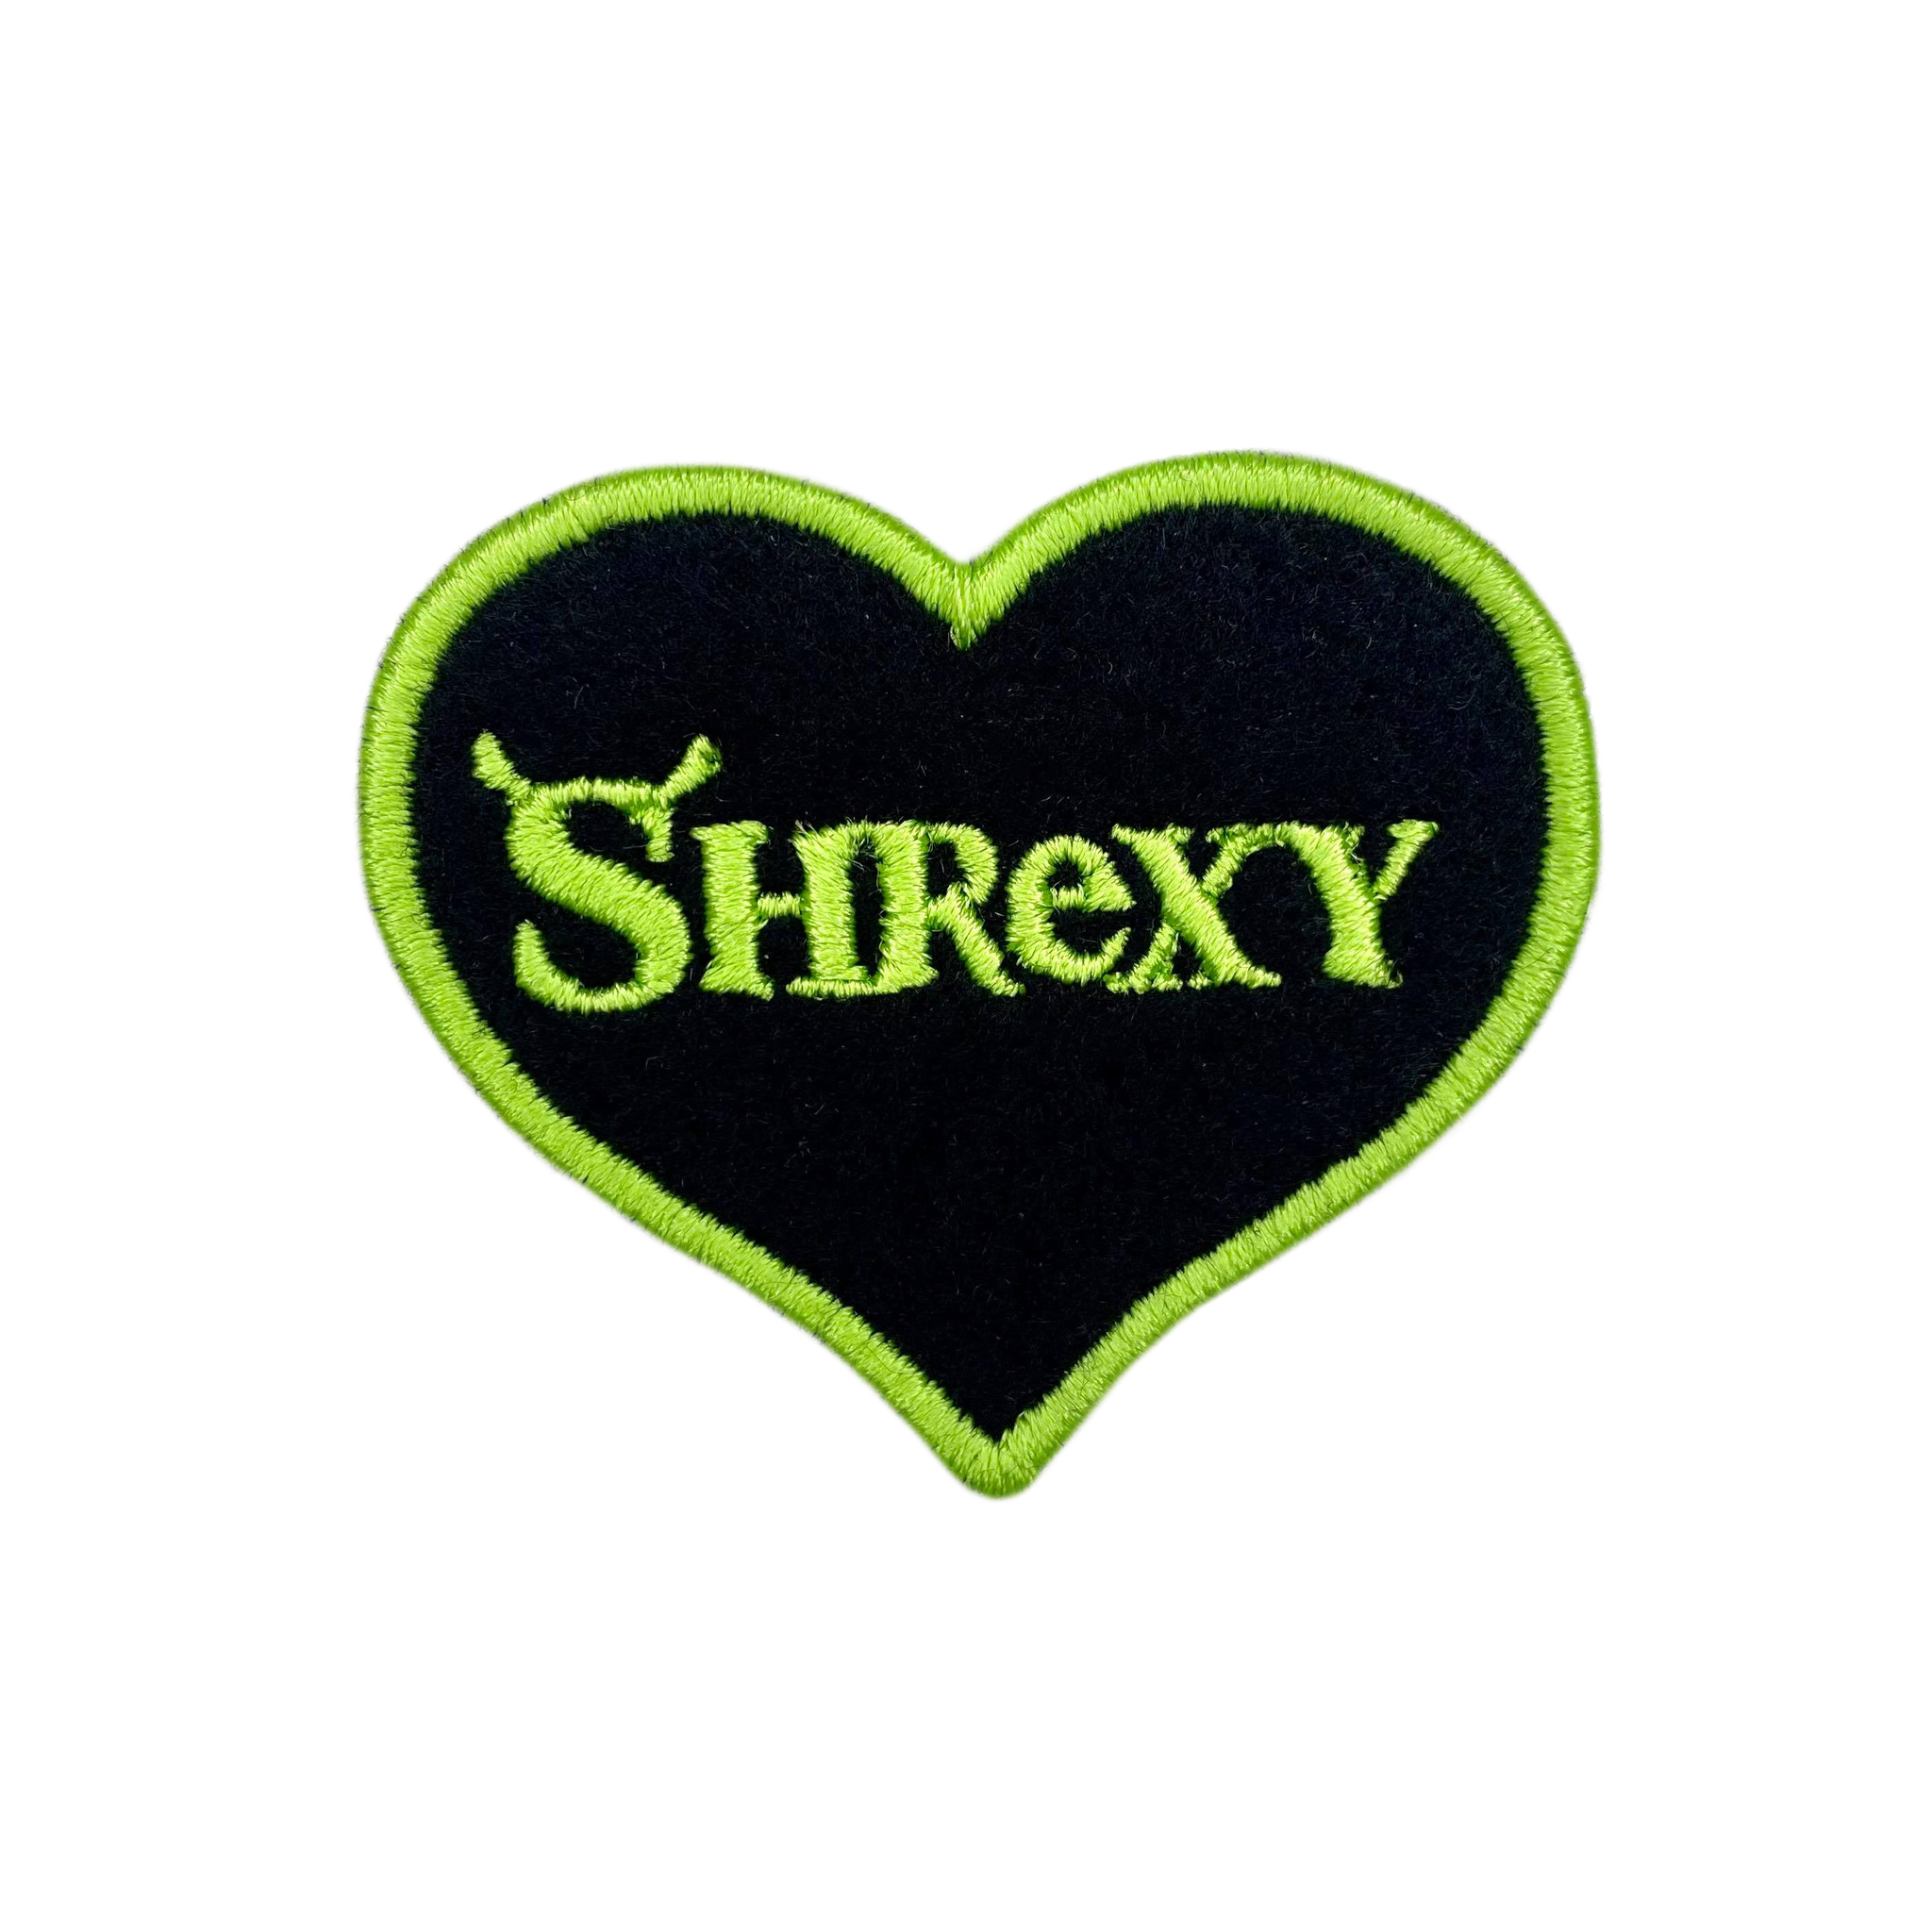 Shrexy Embroidered Iron-on Patch - IncredibleGood Inc